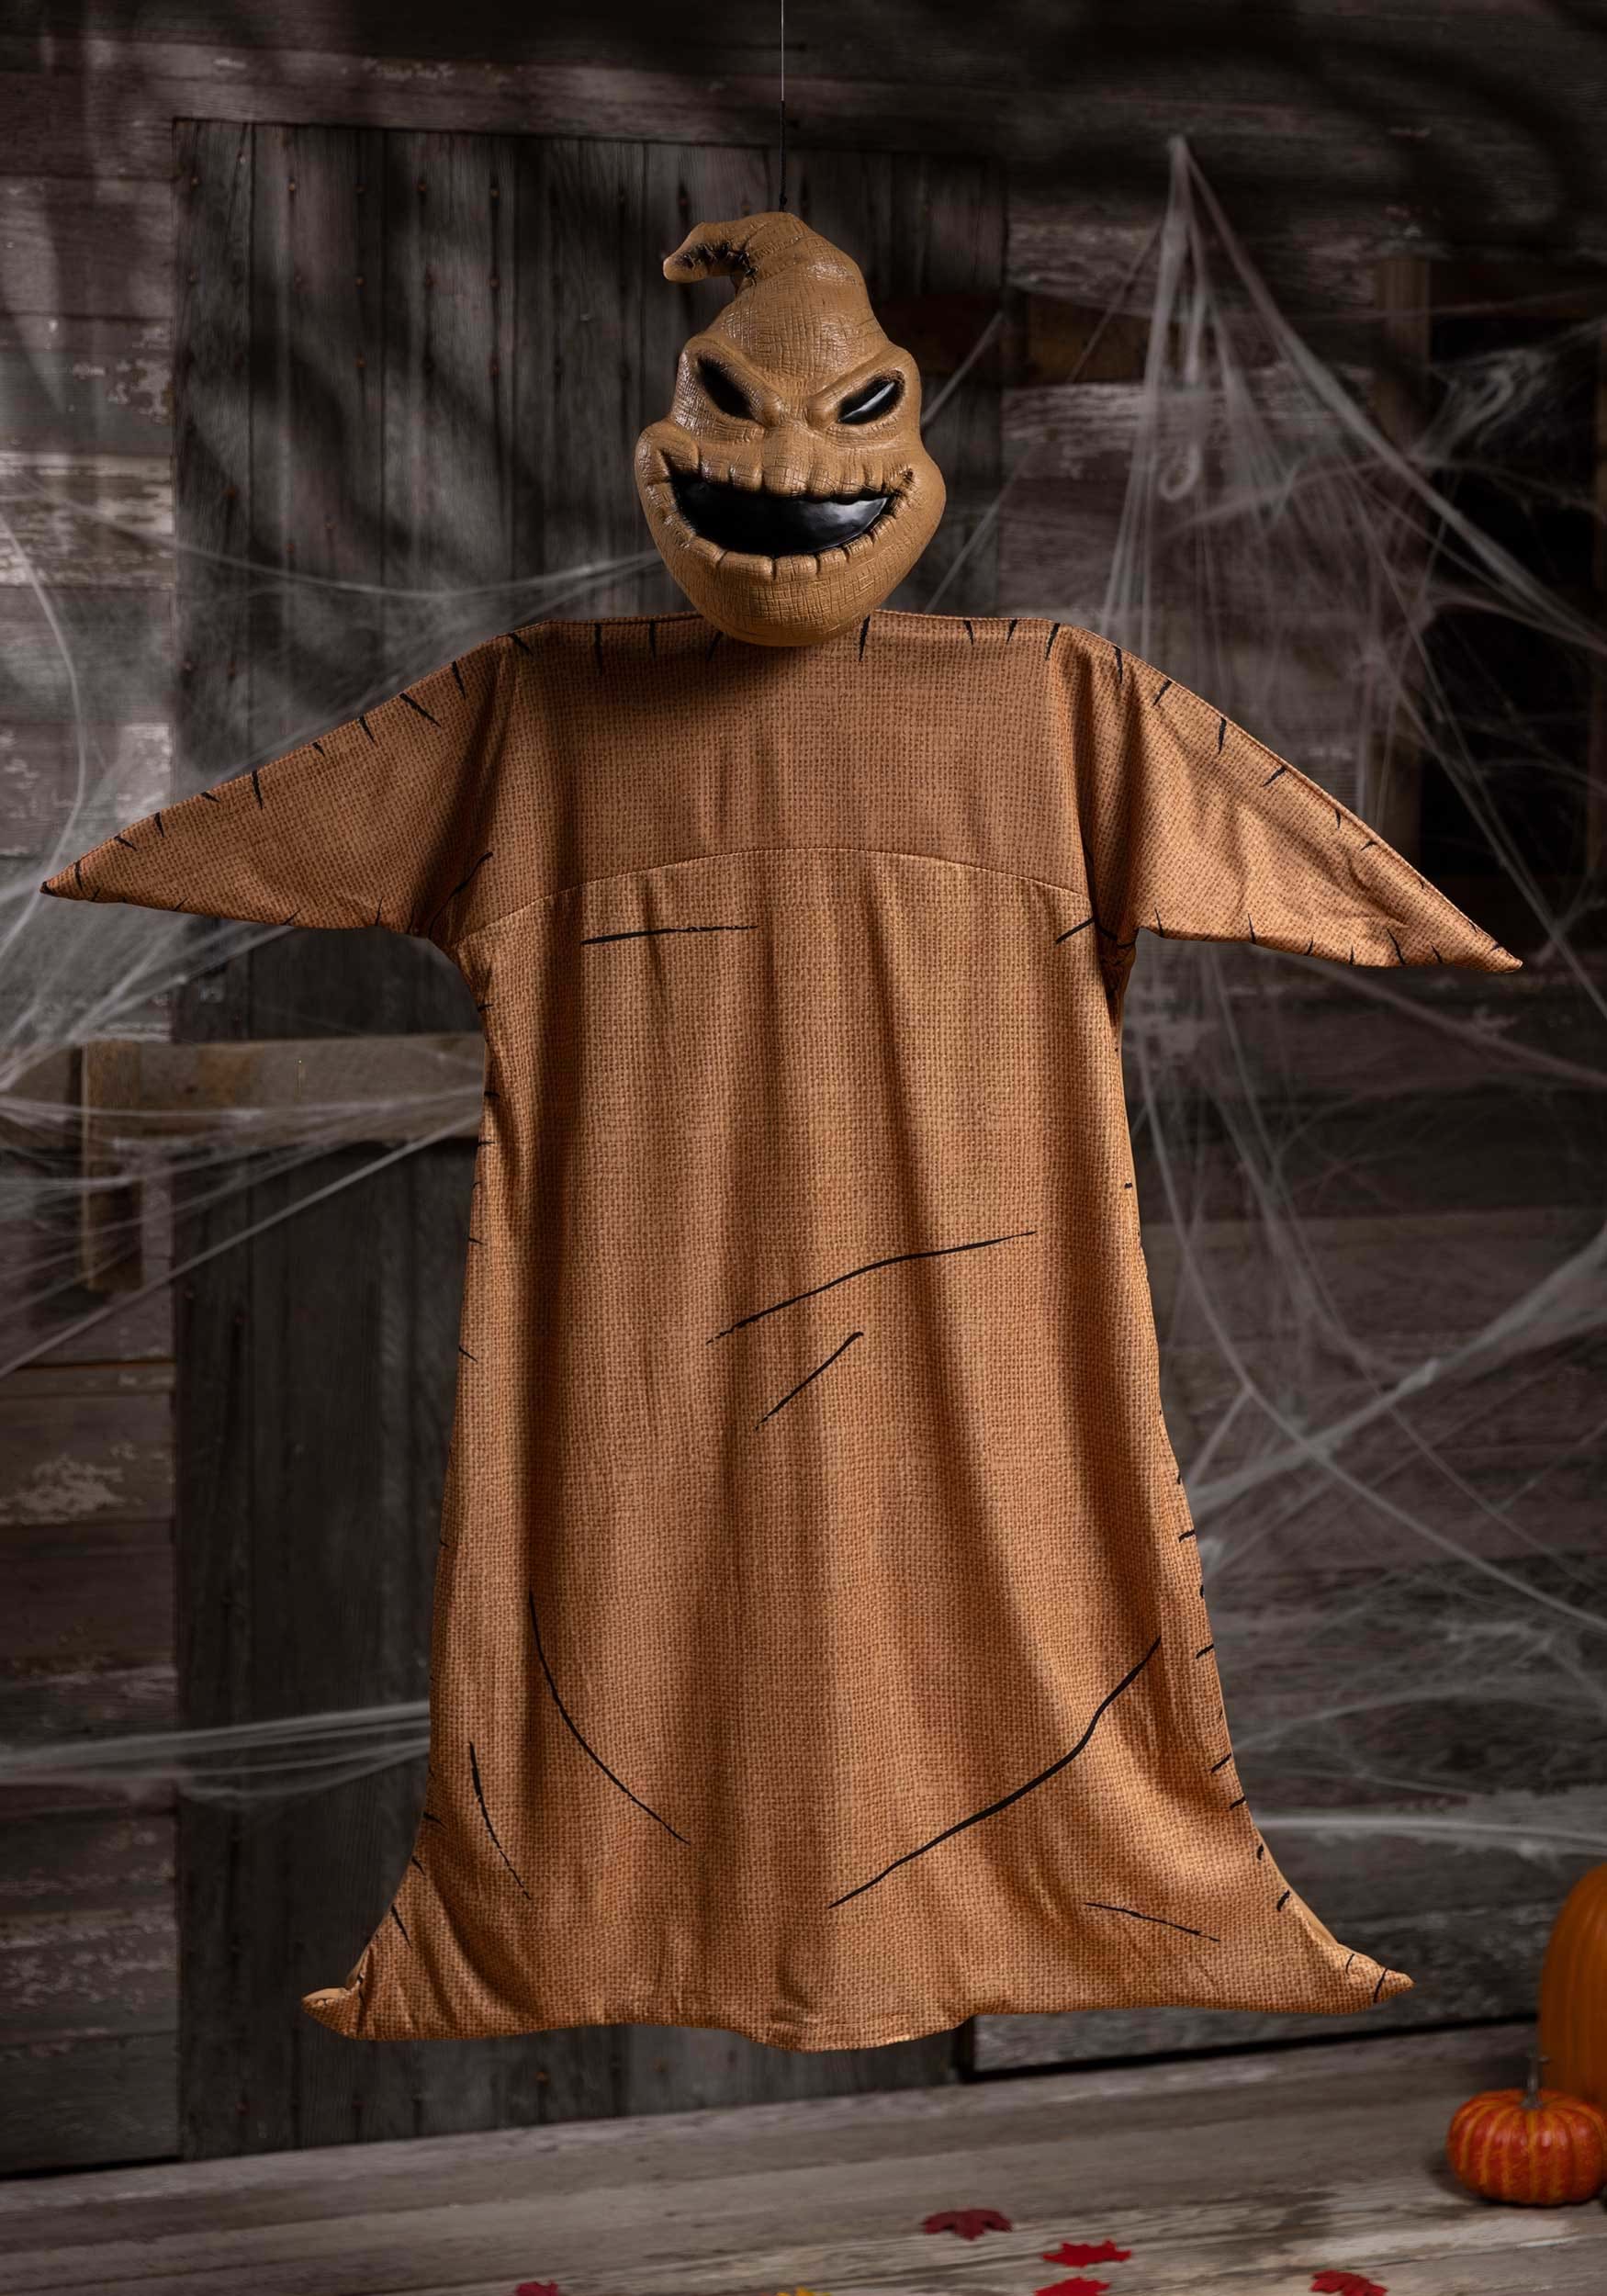 Scary character resembling oogie boogie in halloween setting on